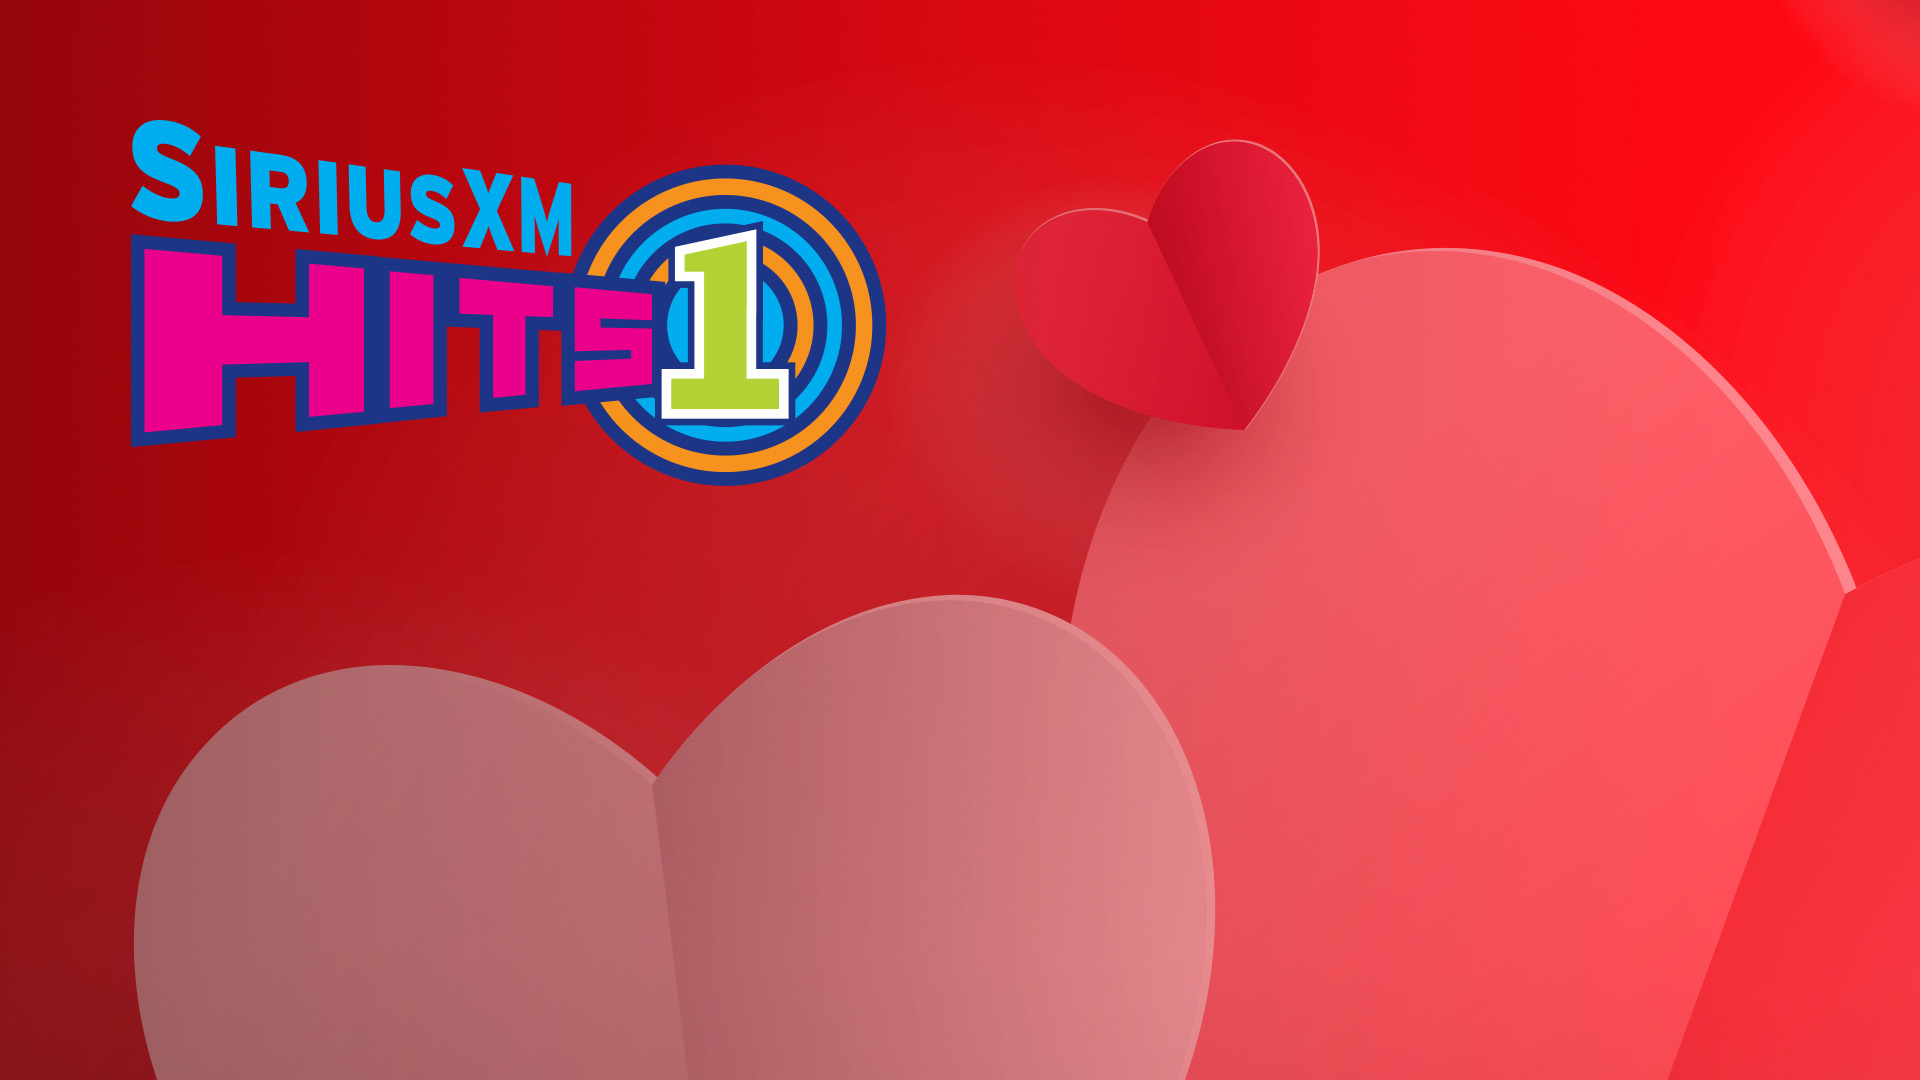 SiriusXM Hits 1 logo on a background of Valentine's Day heart cut outs